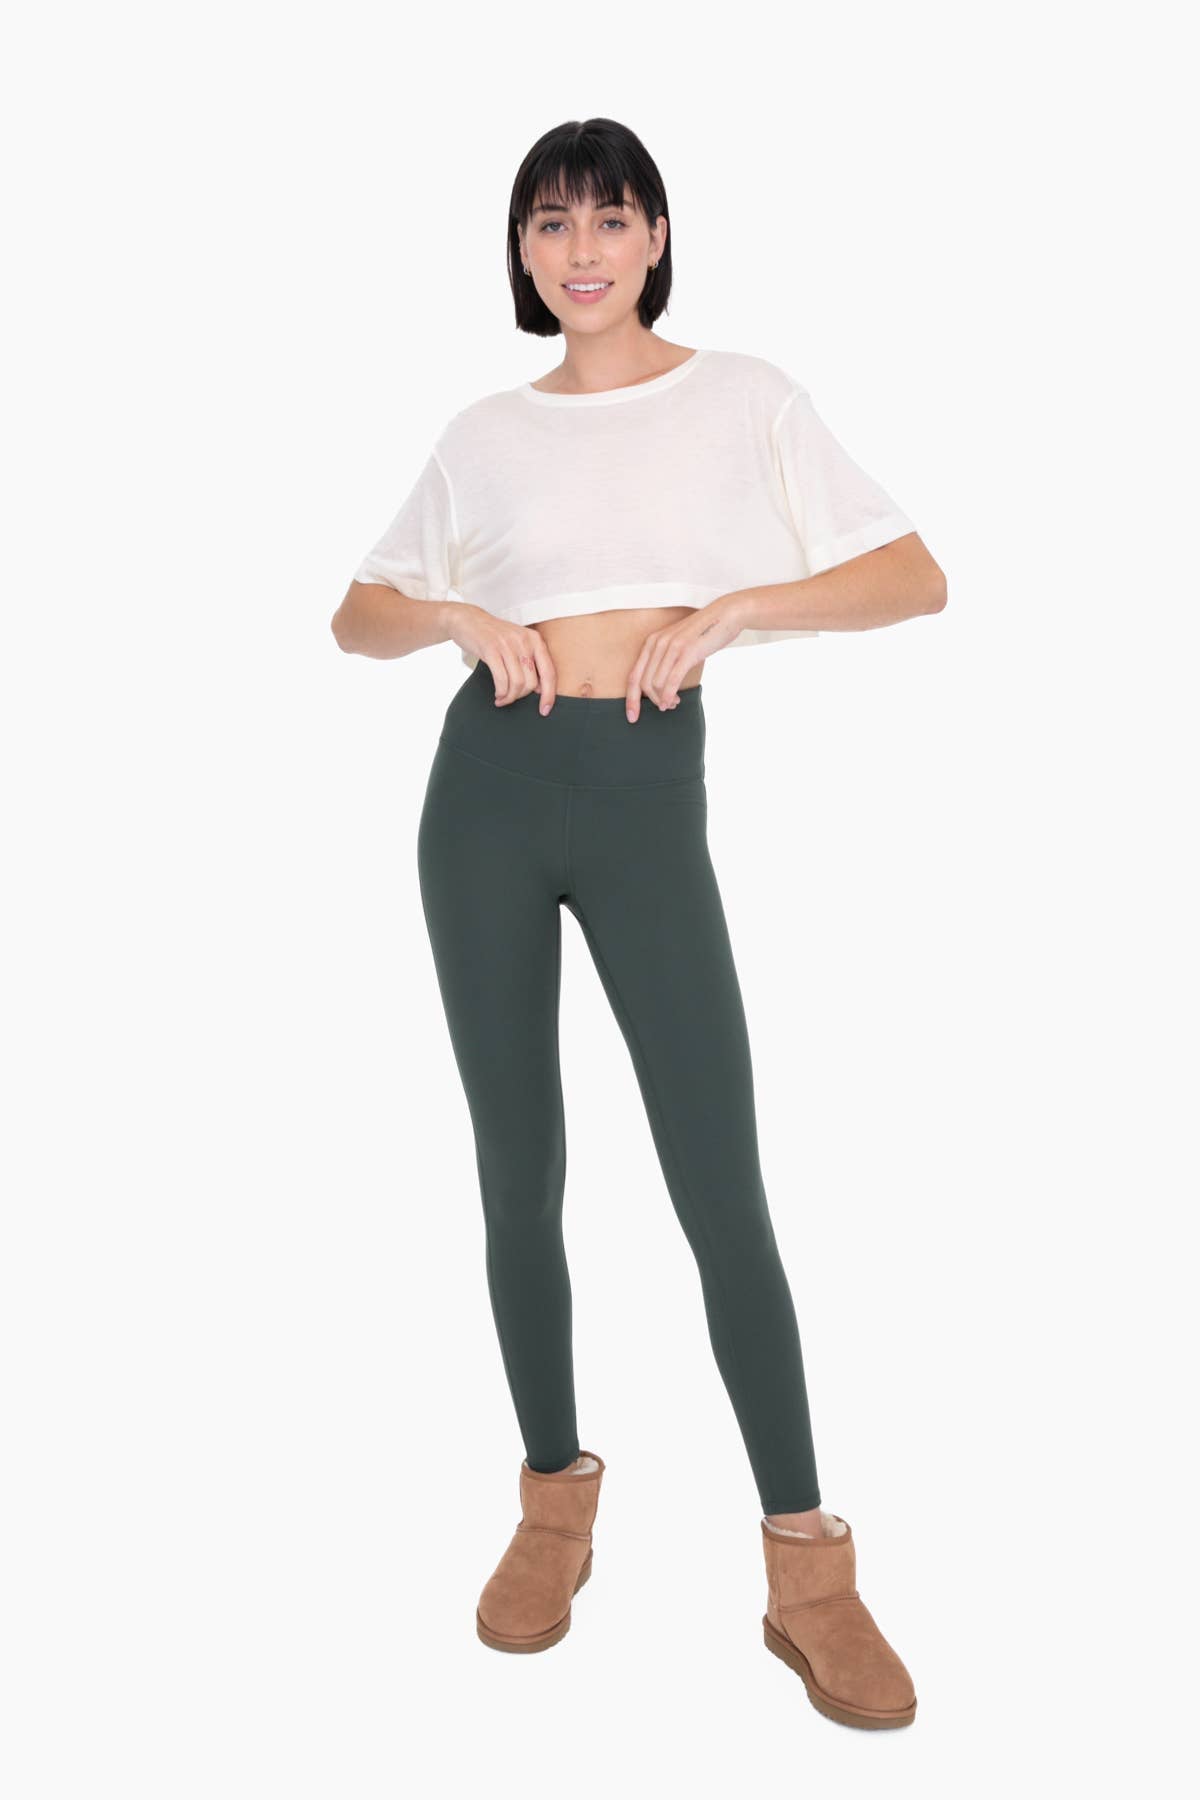 GREEN - Essential Solid Leggings: DEEP FOREST Core Mono B